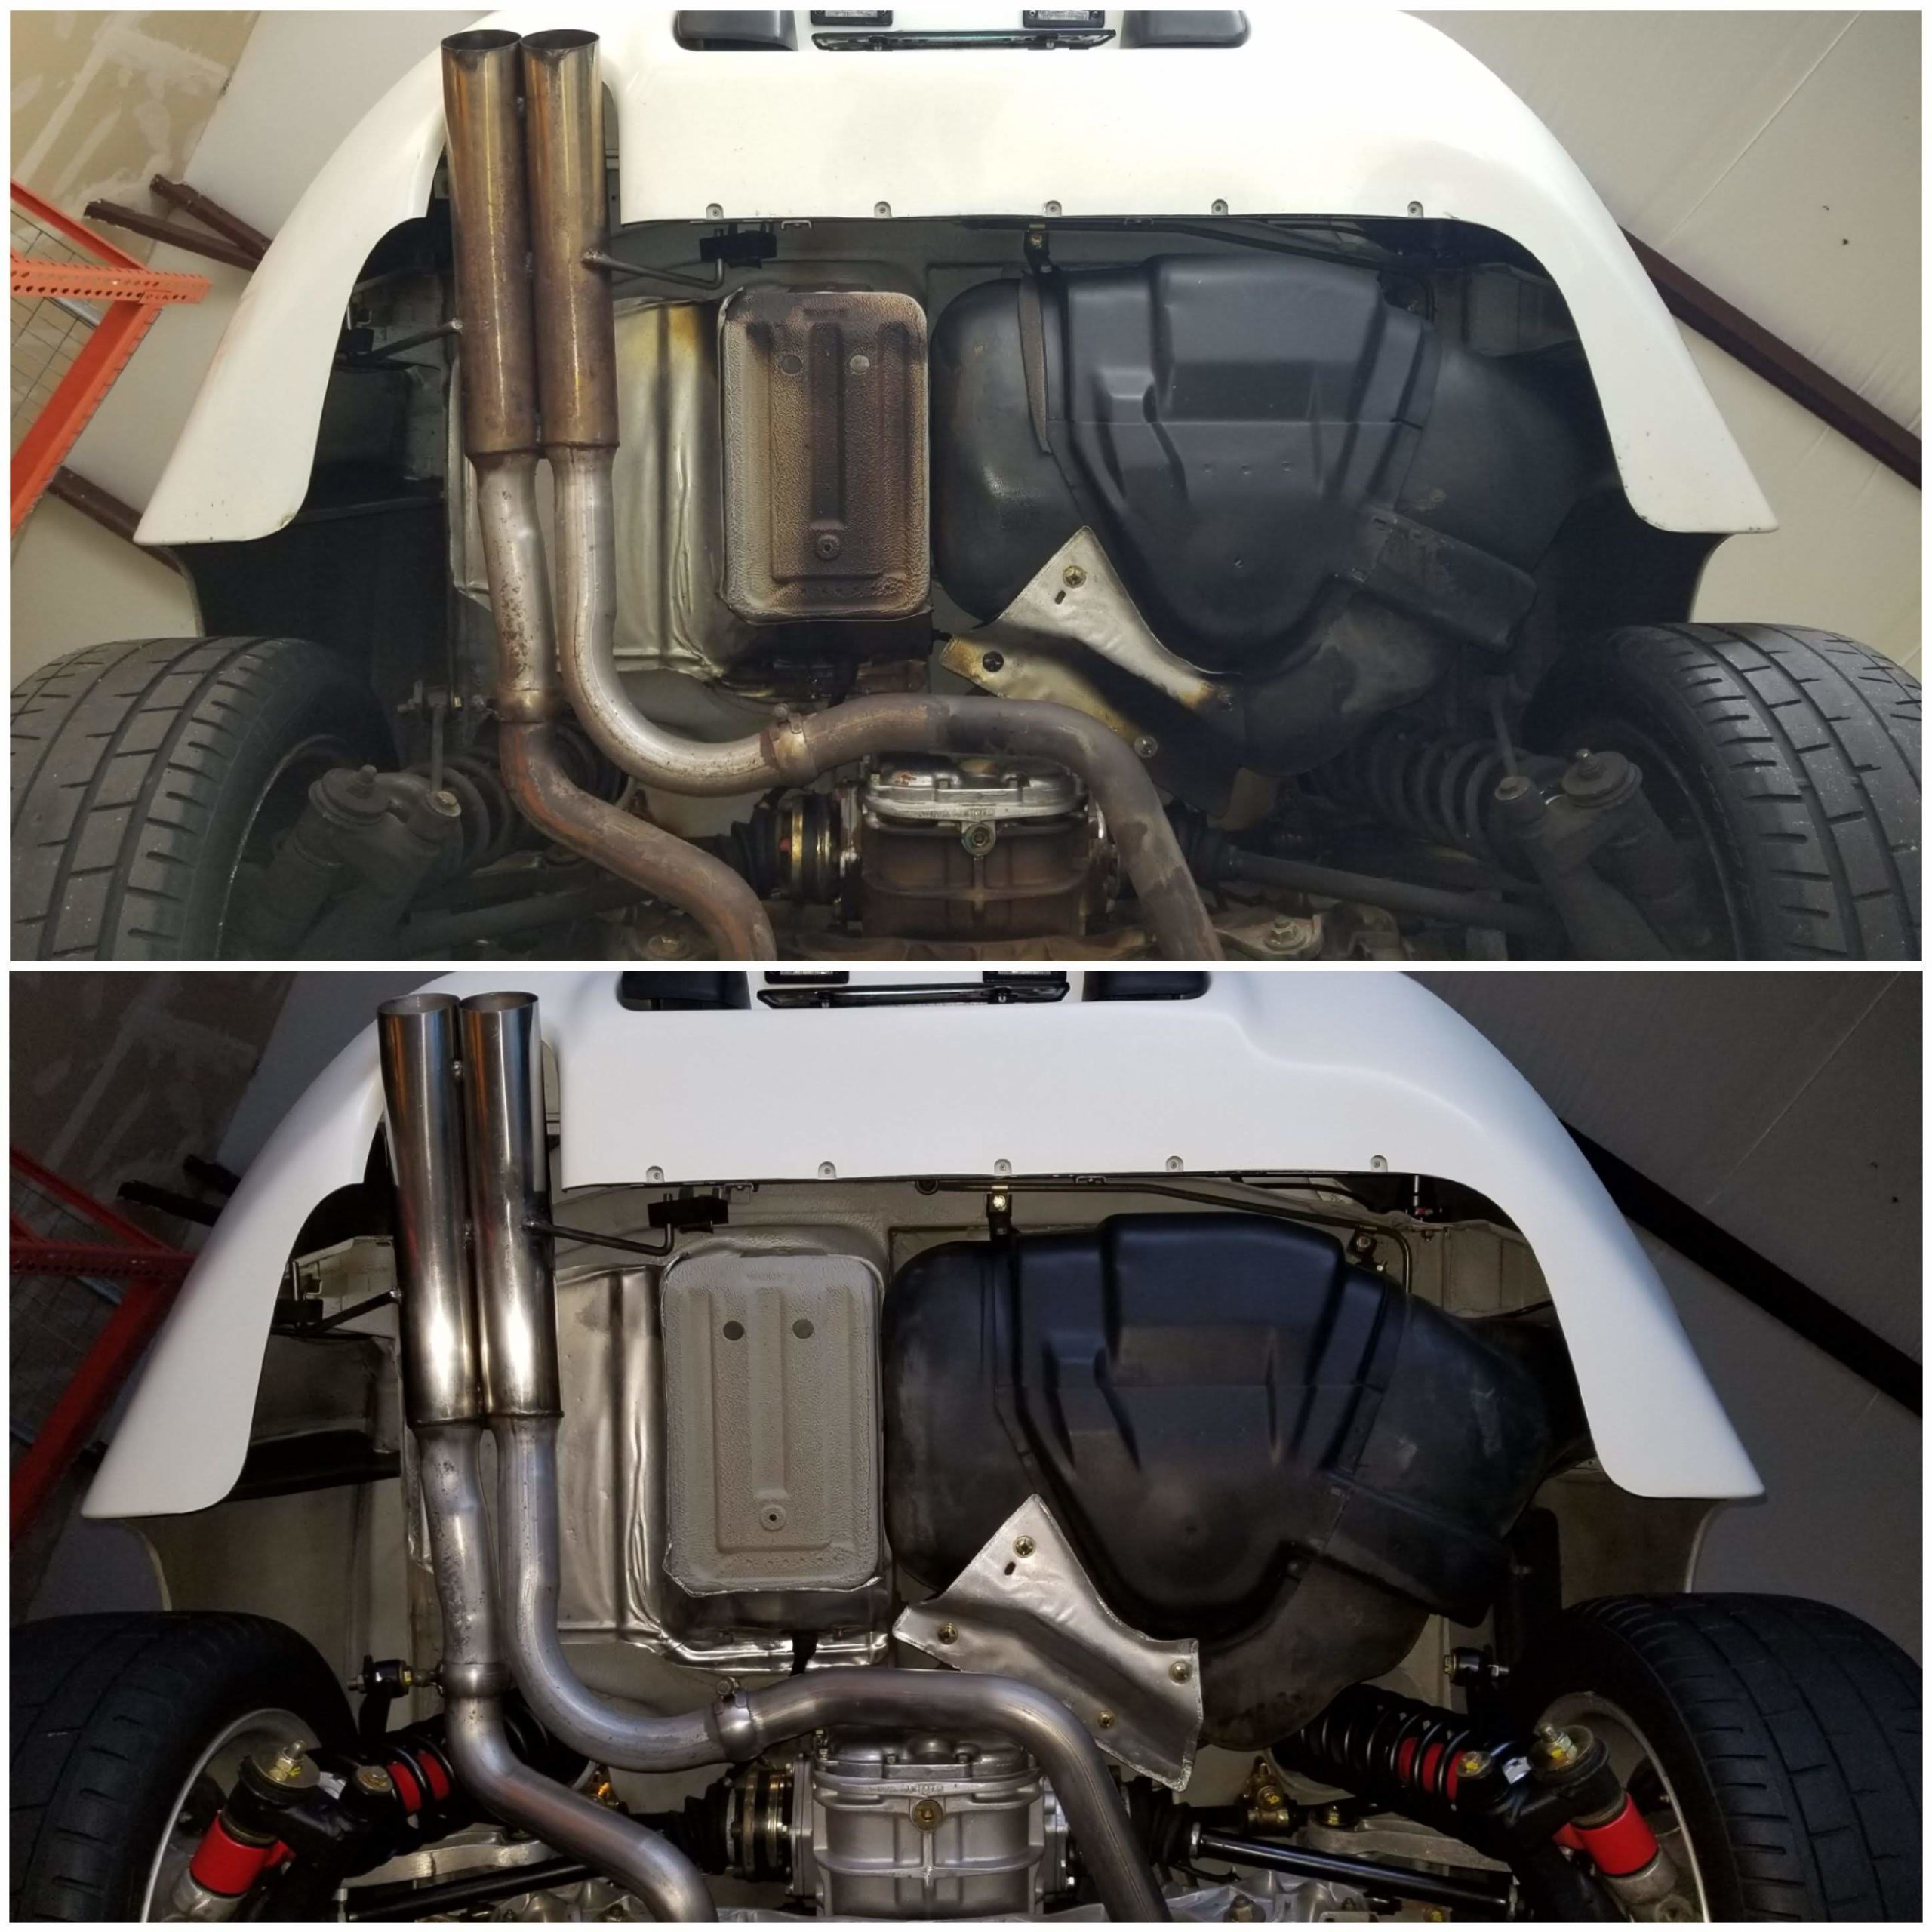 Before and after cleaning and repairing